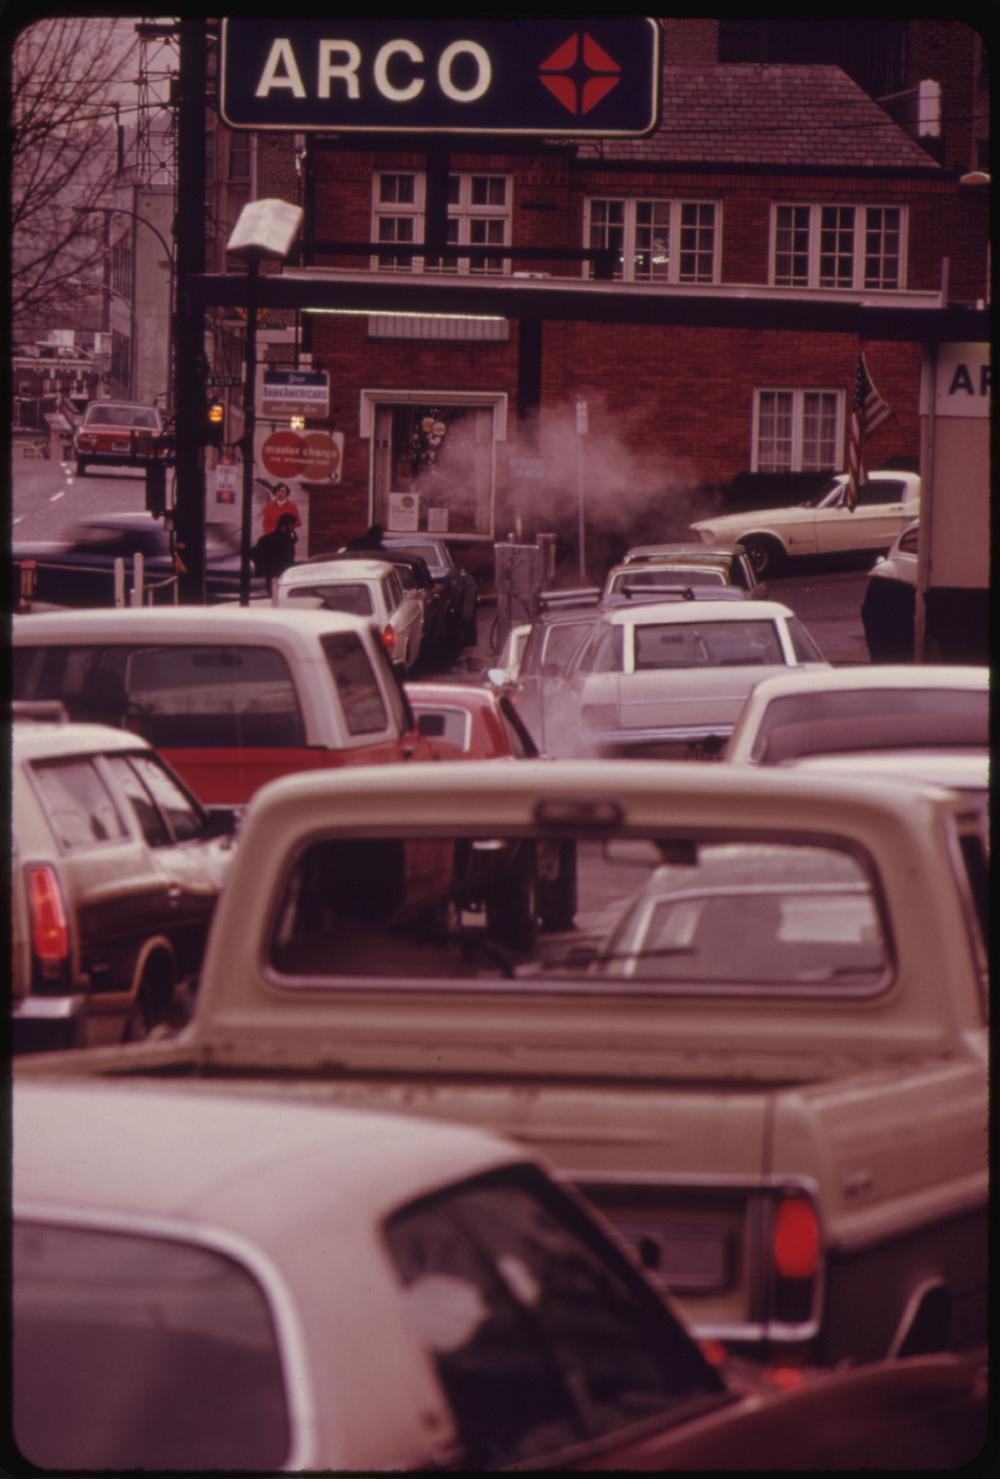 Long lines at gas stations, such as this one in Portland, Ore., in 1973, after Arab nations imposed an oil boycott. High gas prices helped fuel inflation for the rest of the decade.